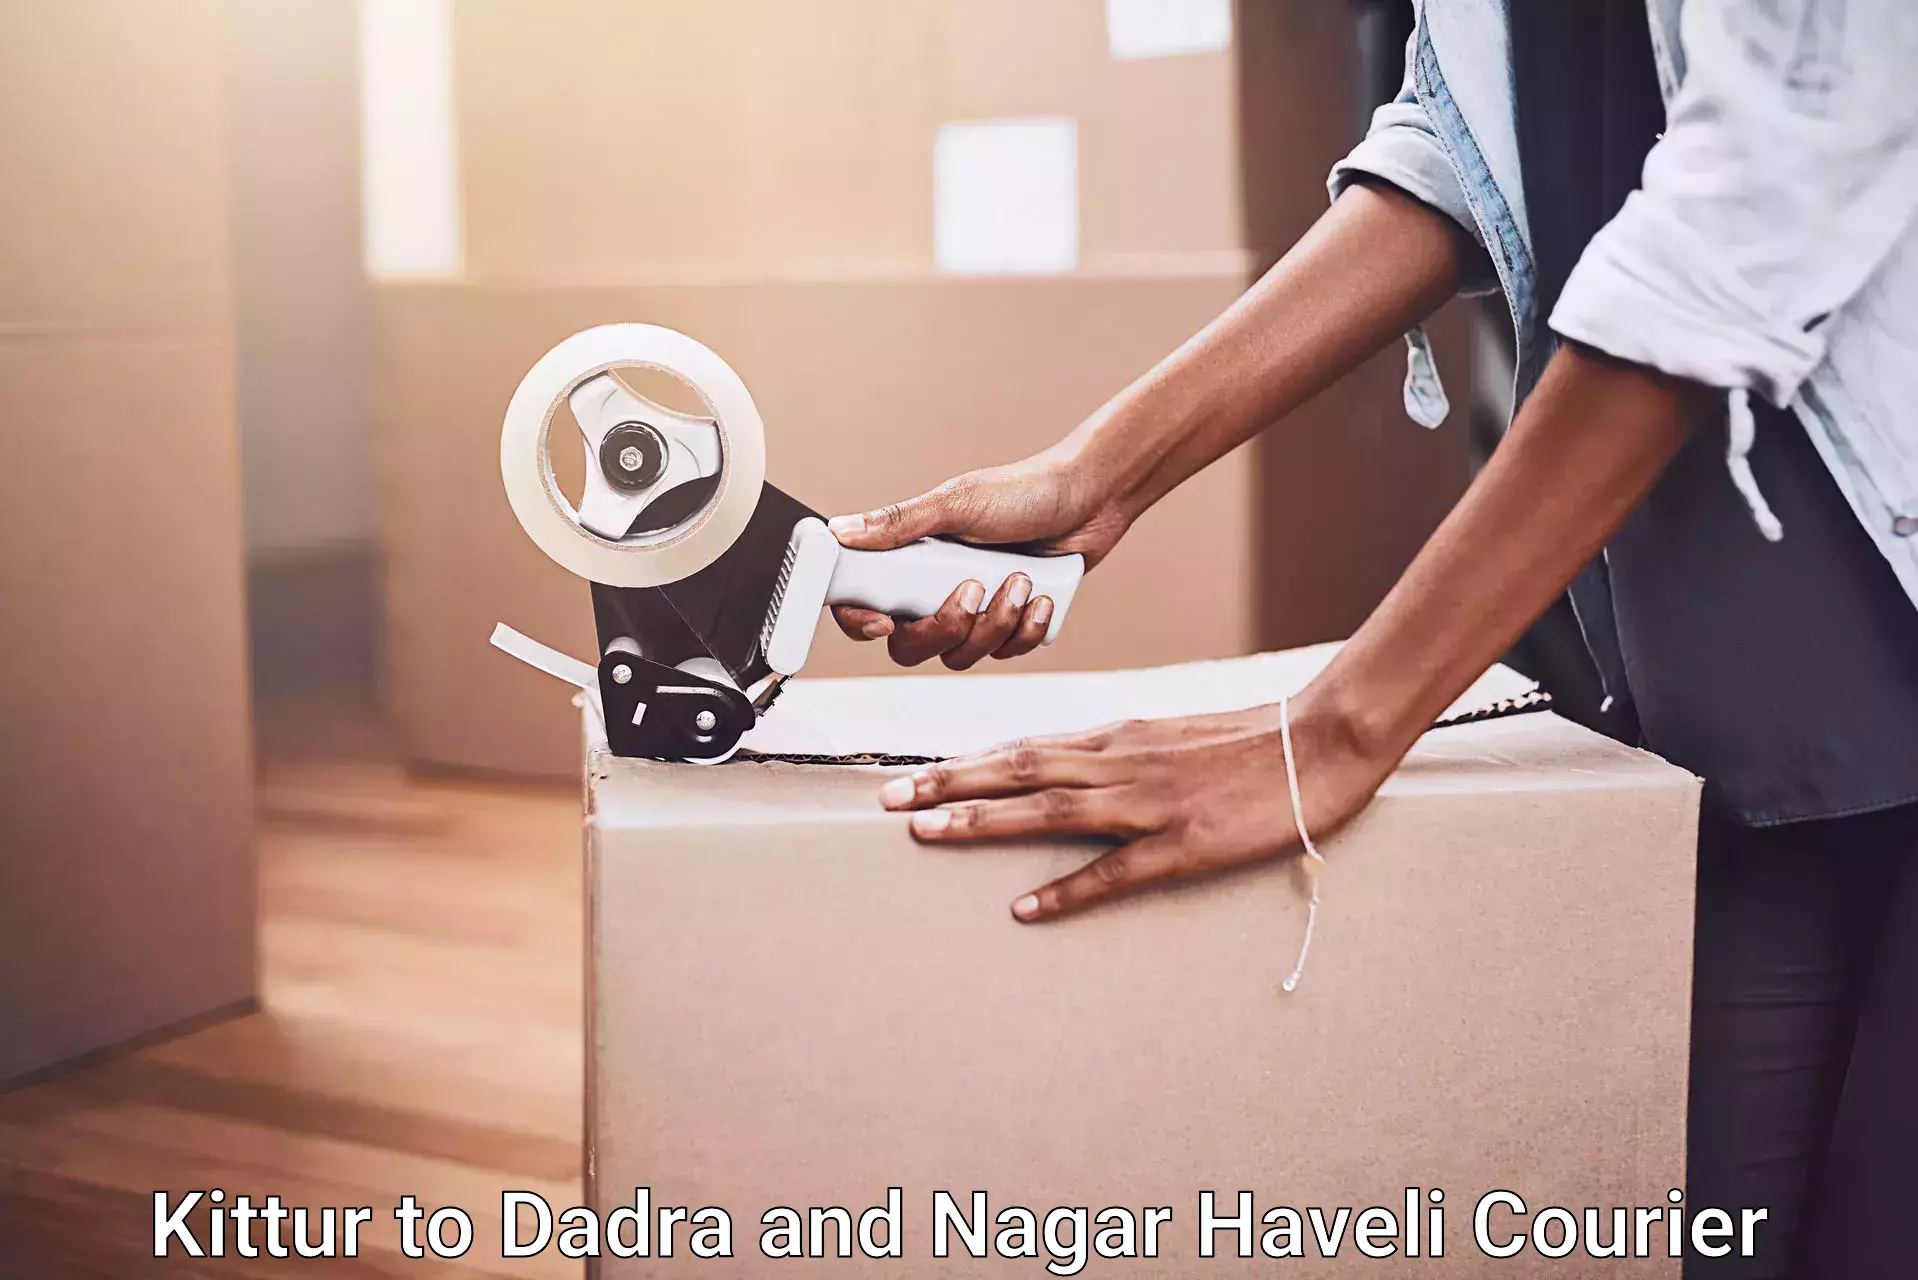 Moving and storage services Kittur to Dadra and Nagar Haveli